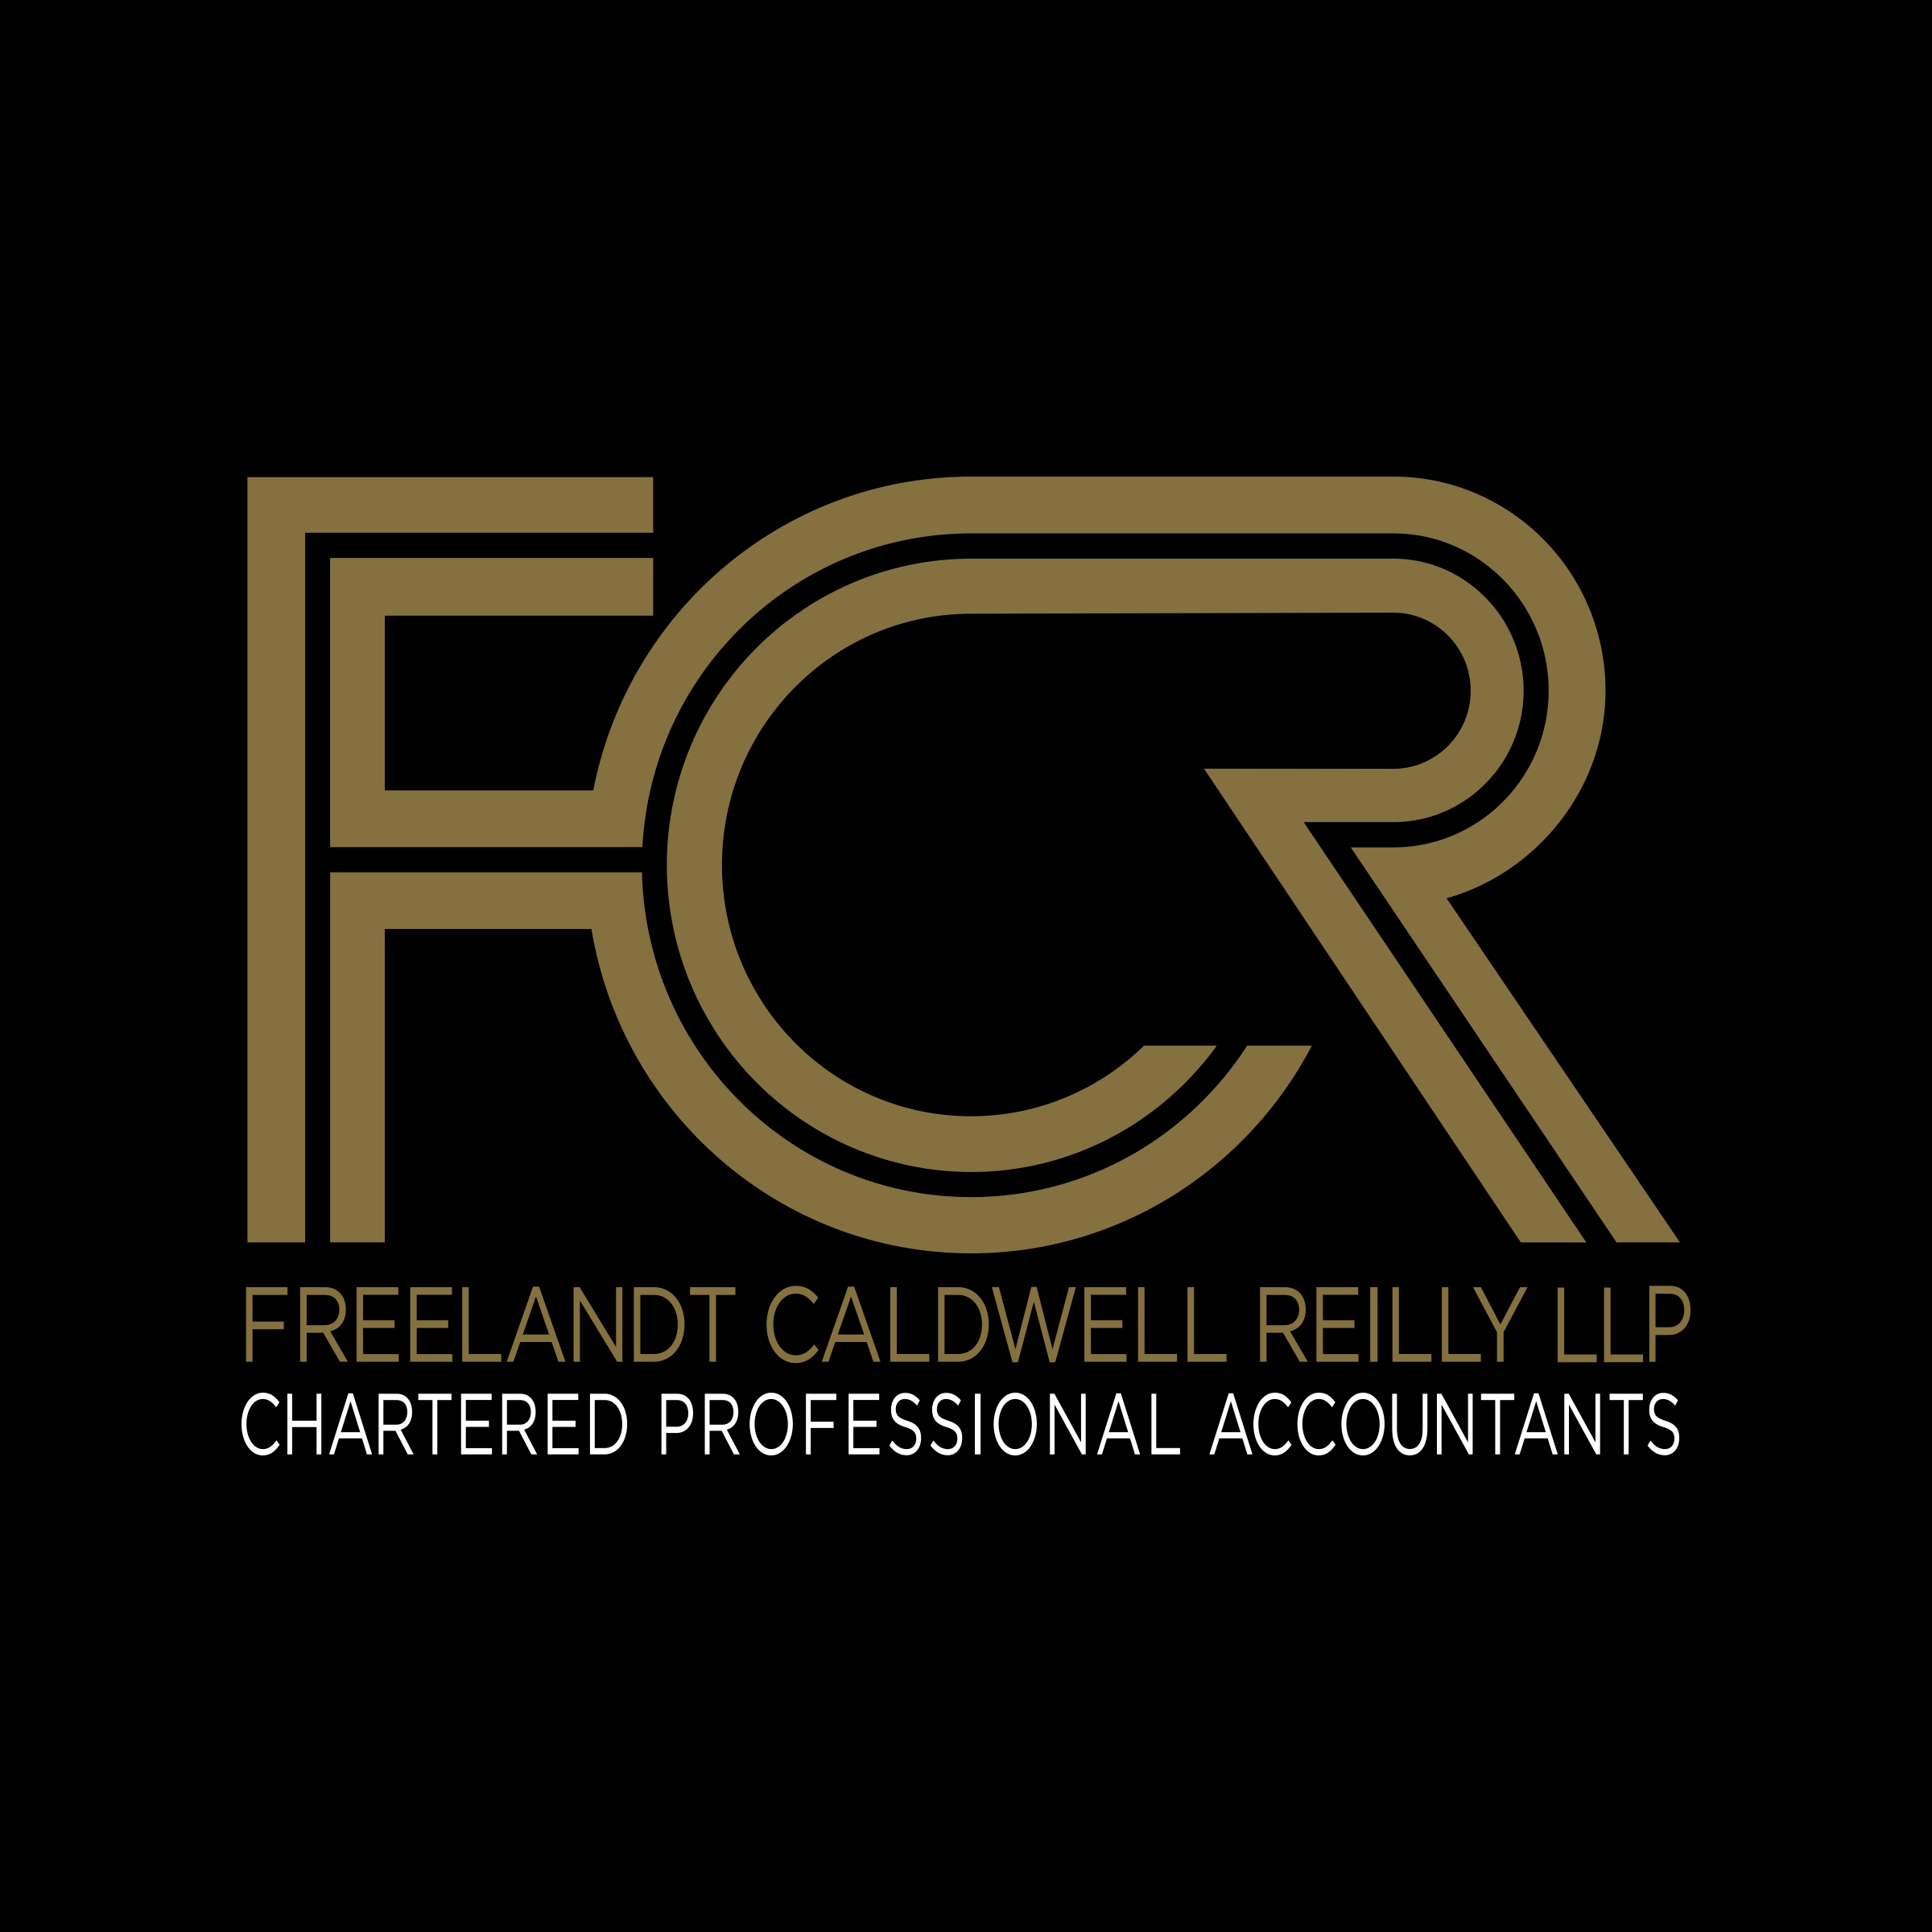 Freelandt Caldwell Reilly LLP Chartered Professional Accountants